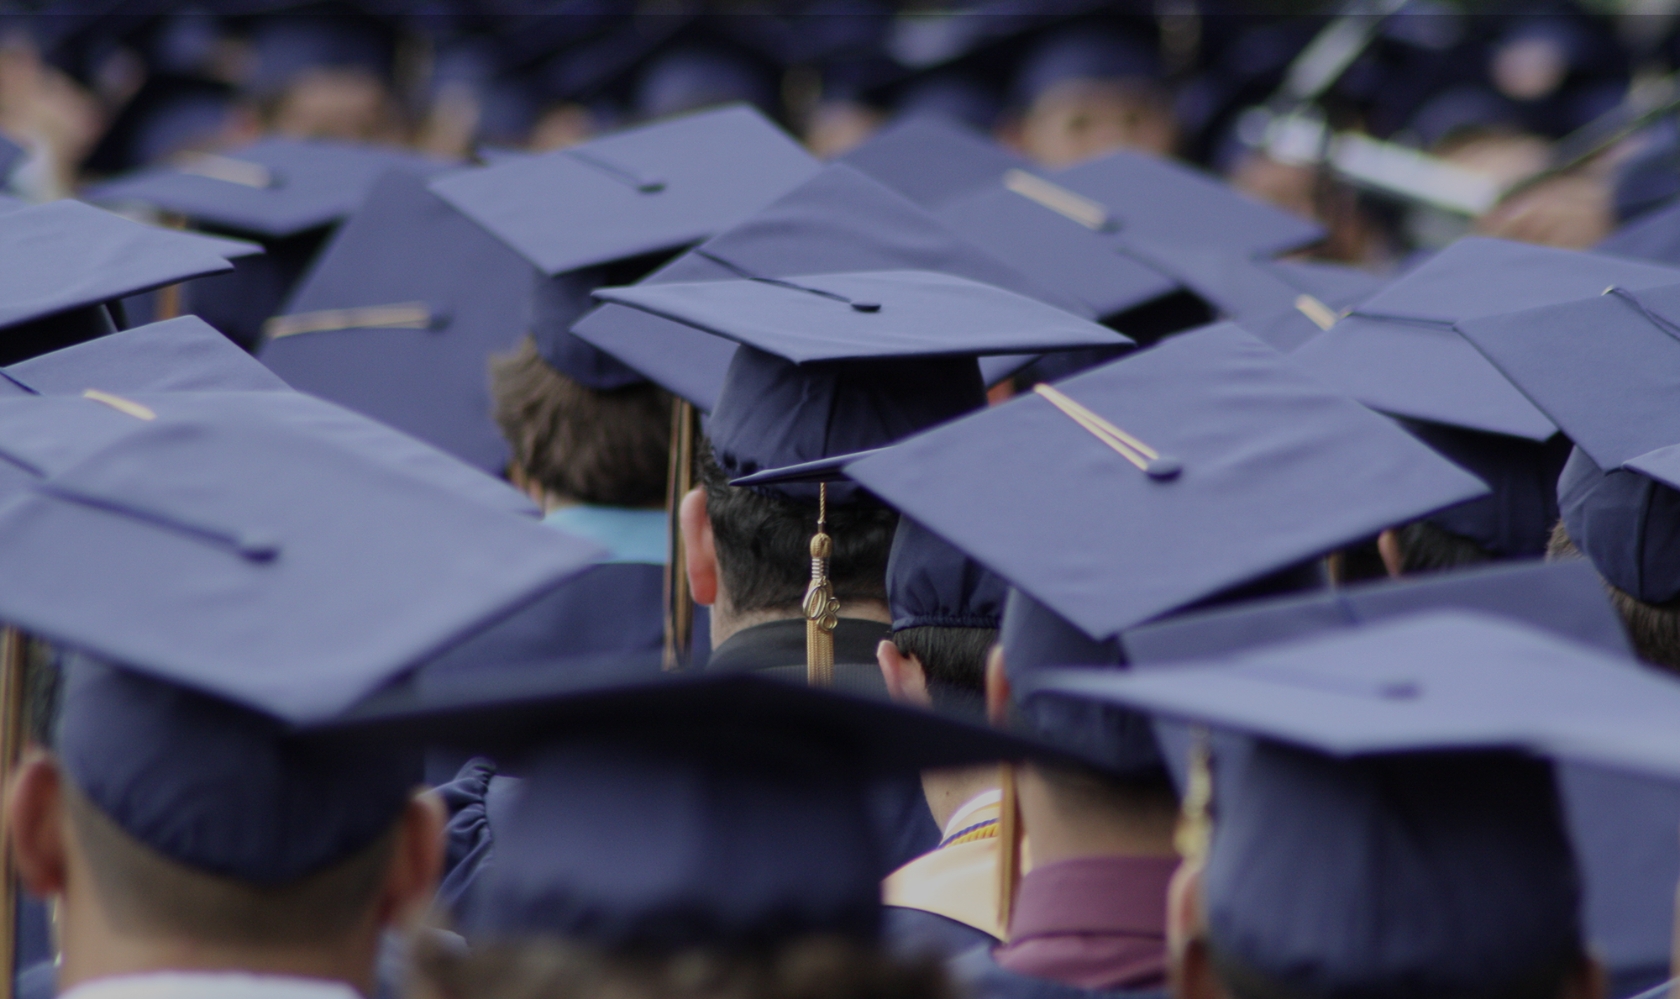 Photograph from behind a crowd of students with graduation attire